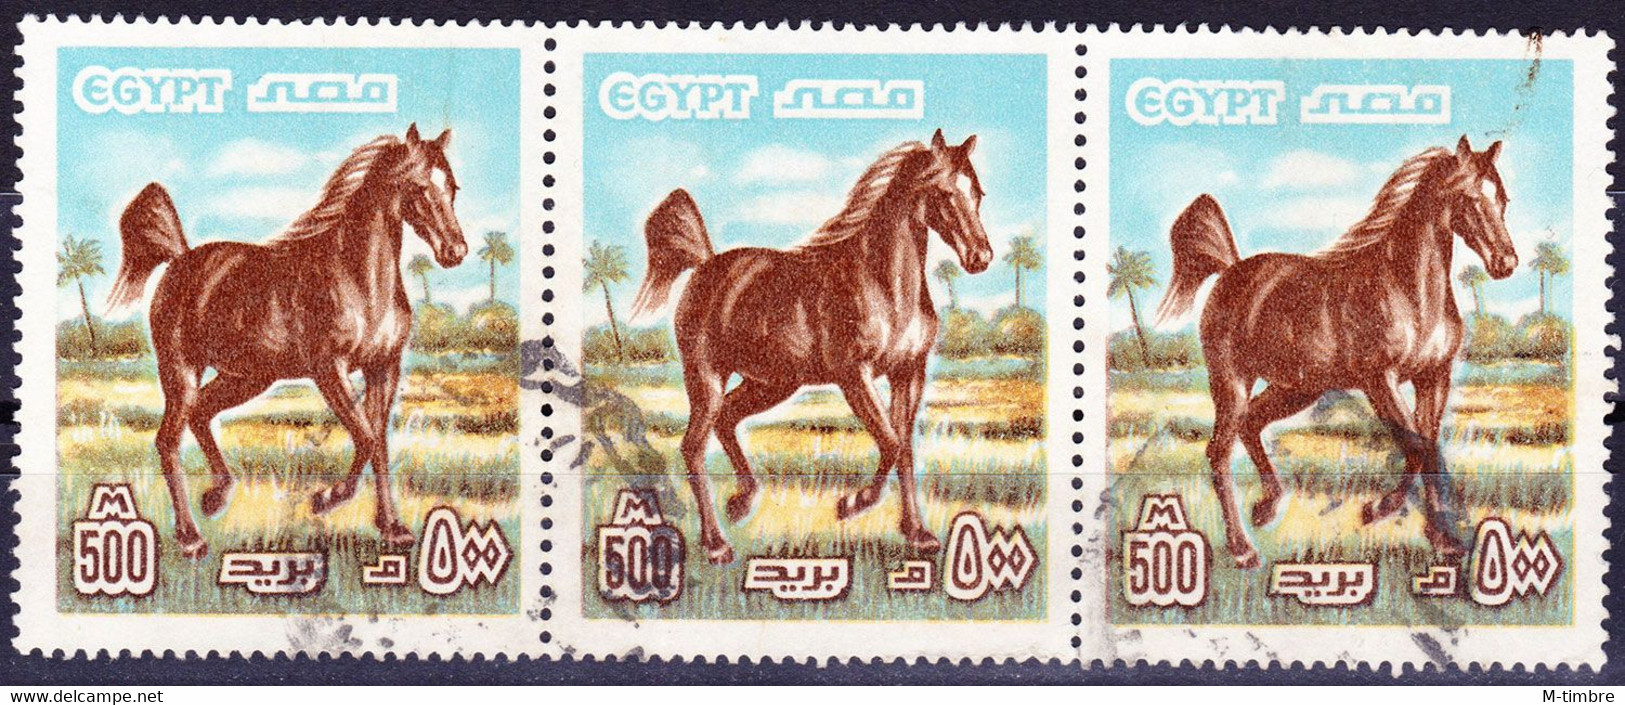 Egypte YT 1042 Mi 1277X Année 1978 (Used °) Animaux - Chevaux - Cheval - Horse - Gebruikt